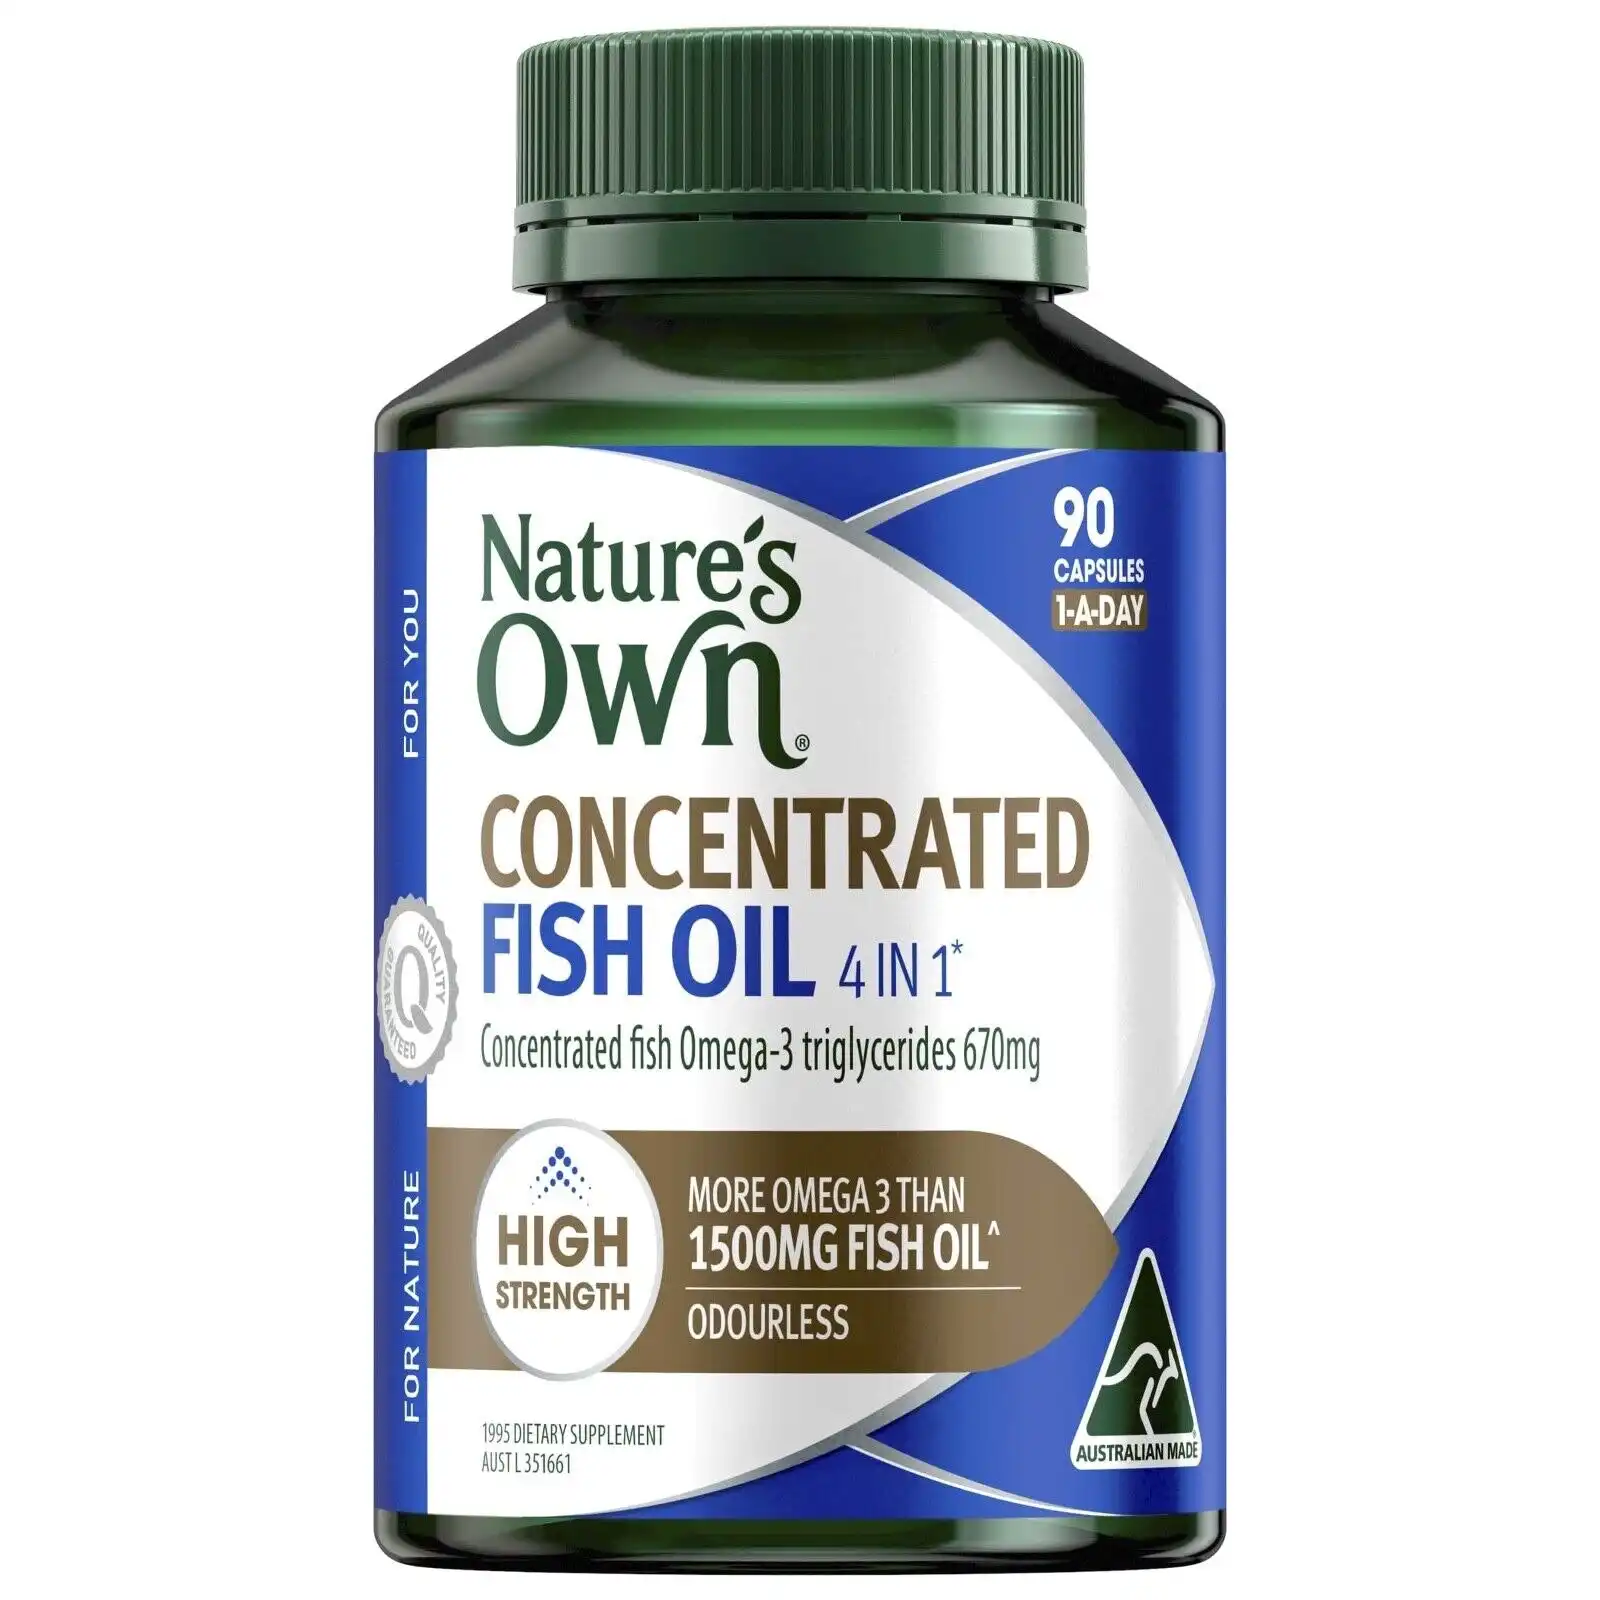 Nature's Own 4 in 1 Concentrated Fish Oil 90 Capsules Brain, Eye & Heart Health